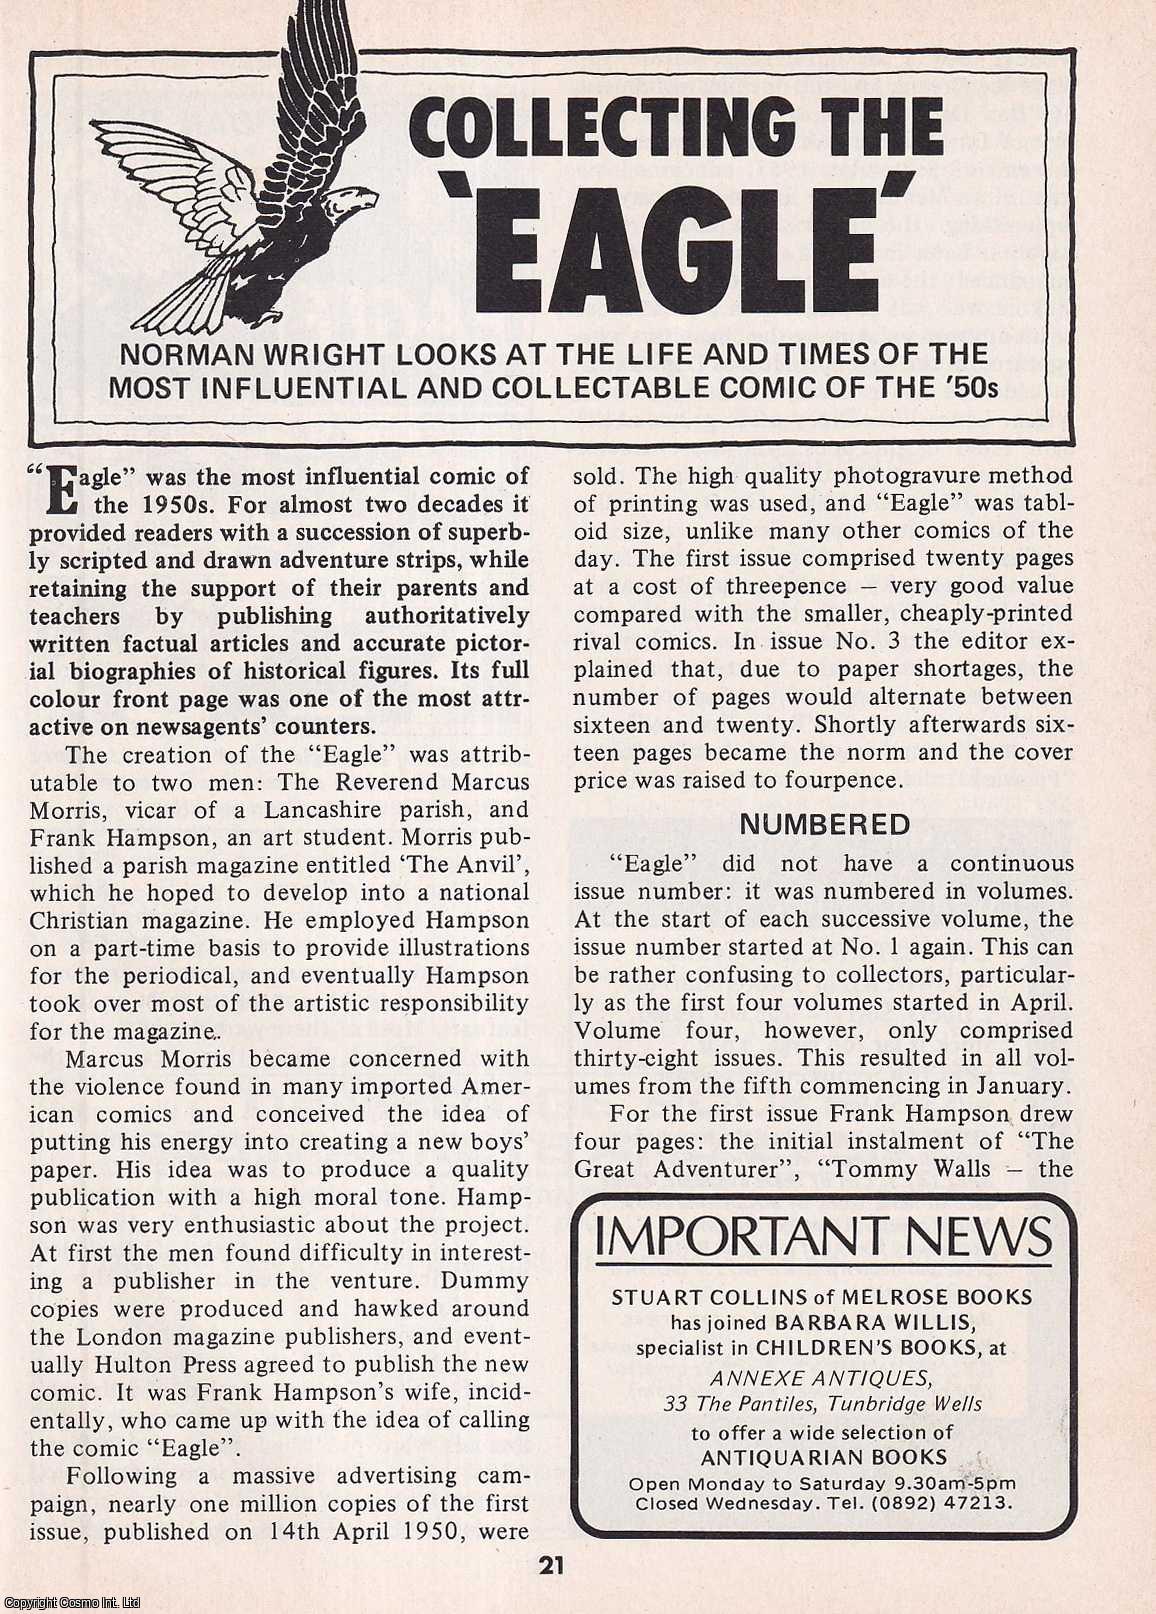 Norman Wright - Collecting The Eagle Comic : The Most Influential & Collectable Comic of The 50s. This is an original article separated from an issue of The Book & Magazine Collector publication.